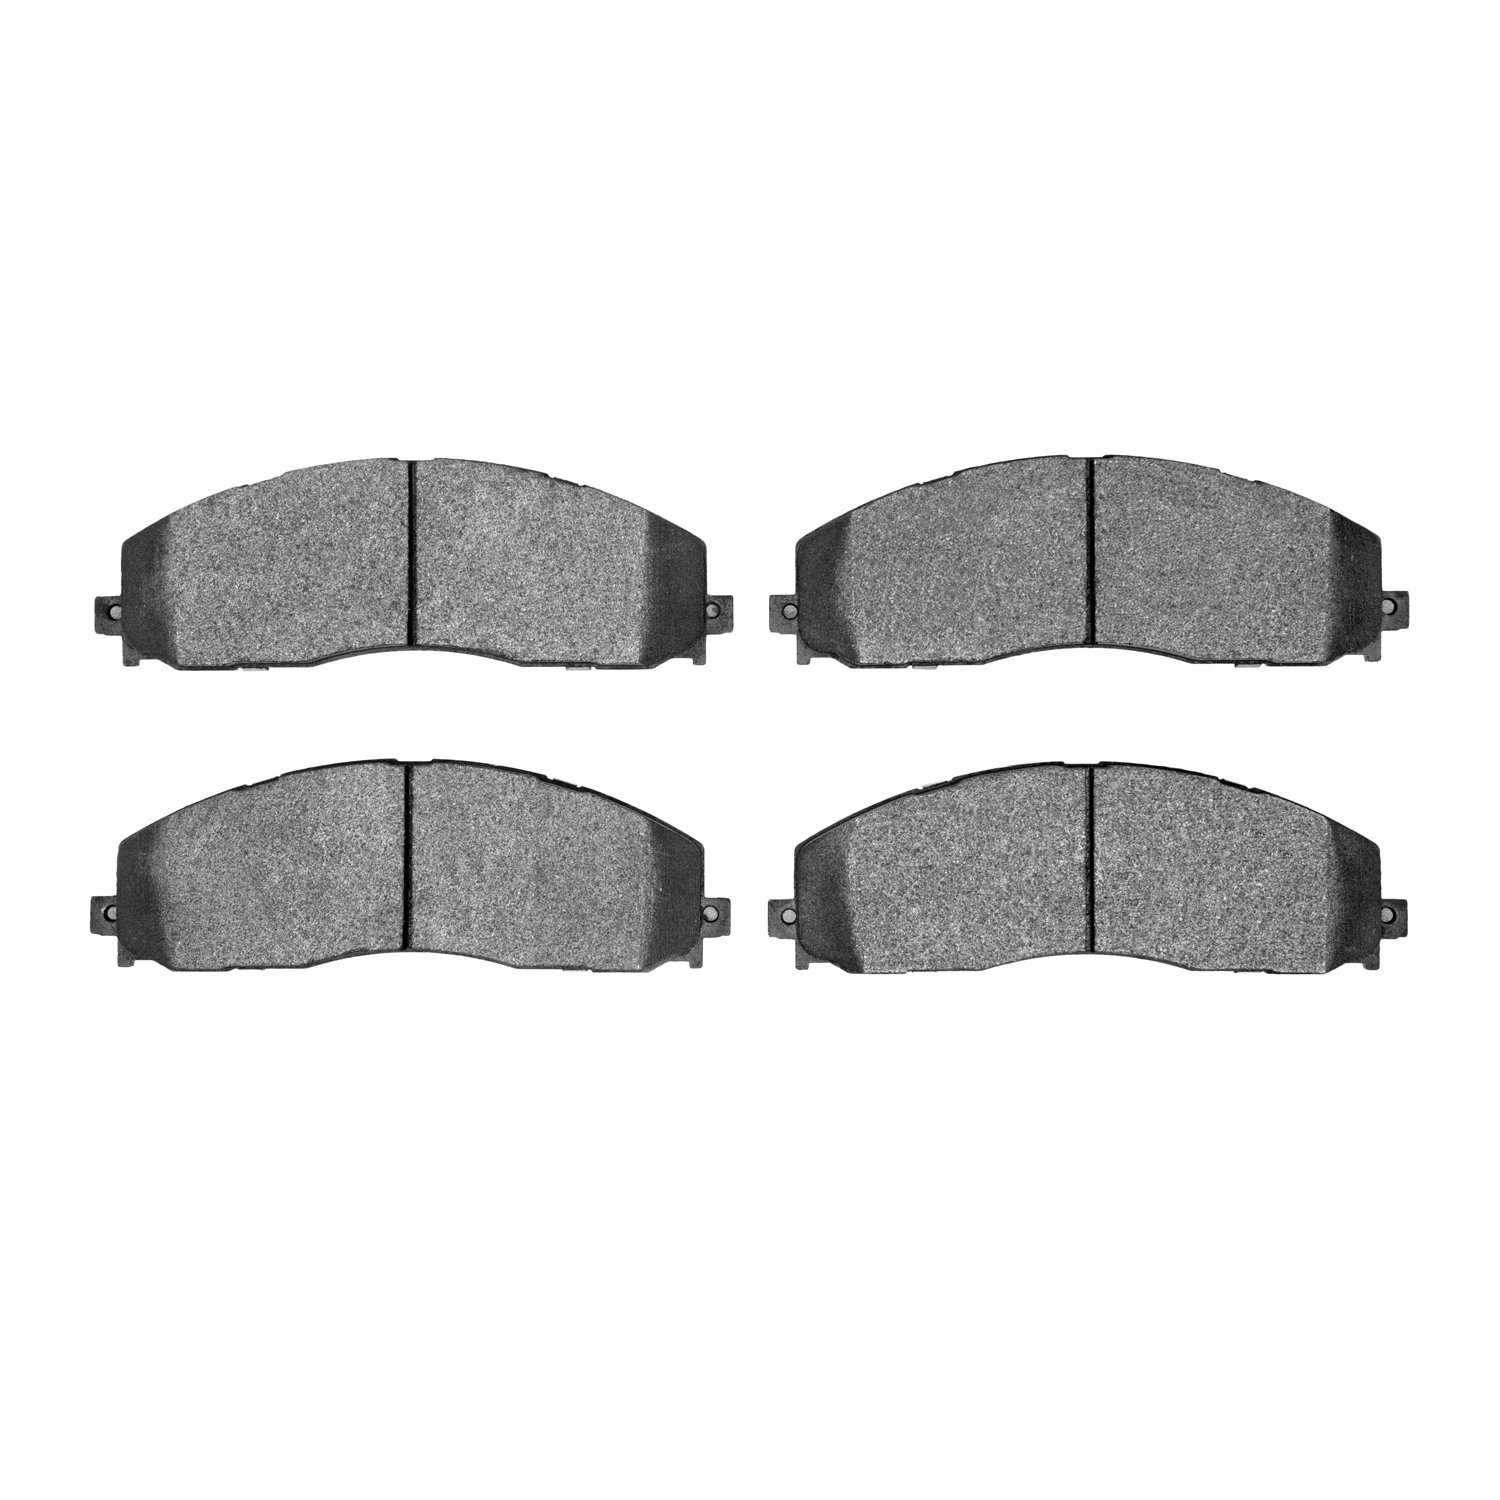 1400-1680-00 Ultimate-Duty Brake Pads Kit, Fits Select Ford/Lincoln/Mercury/Mazda, Position: Front,Fr